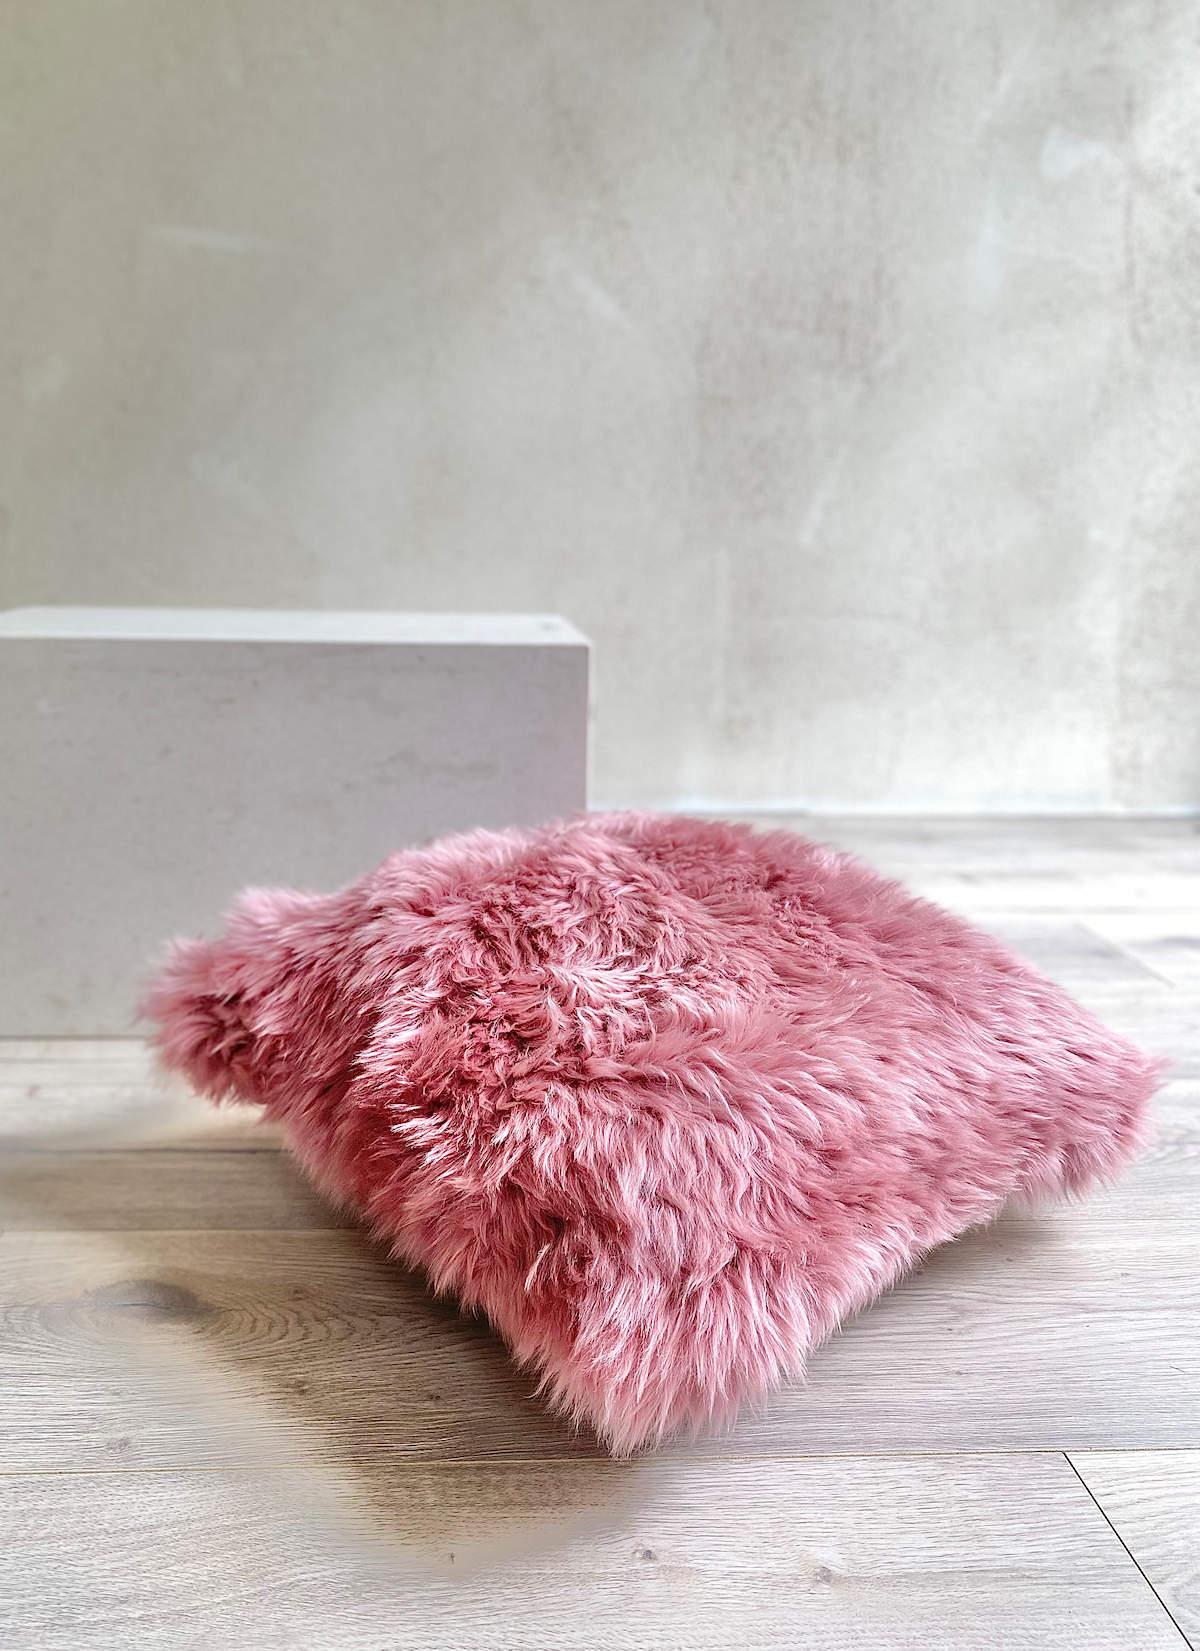 Introduce rich and irresistible tactile elements to your decor with this sumptuous pink fur pillow. Featuring a silky wool pile with superior softness, this collection of hand-crafted fluffy pillows is made from high-quality New Zealand merino